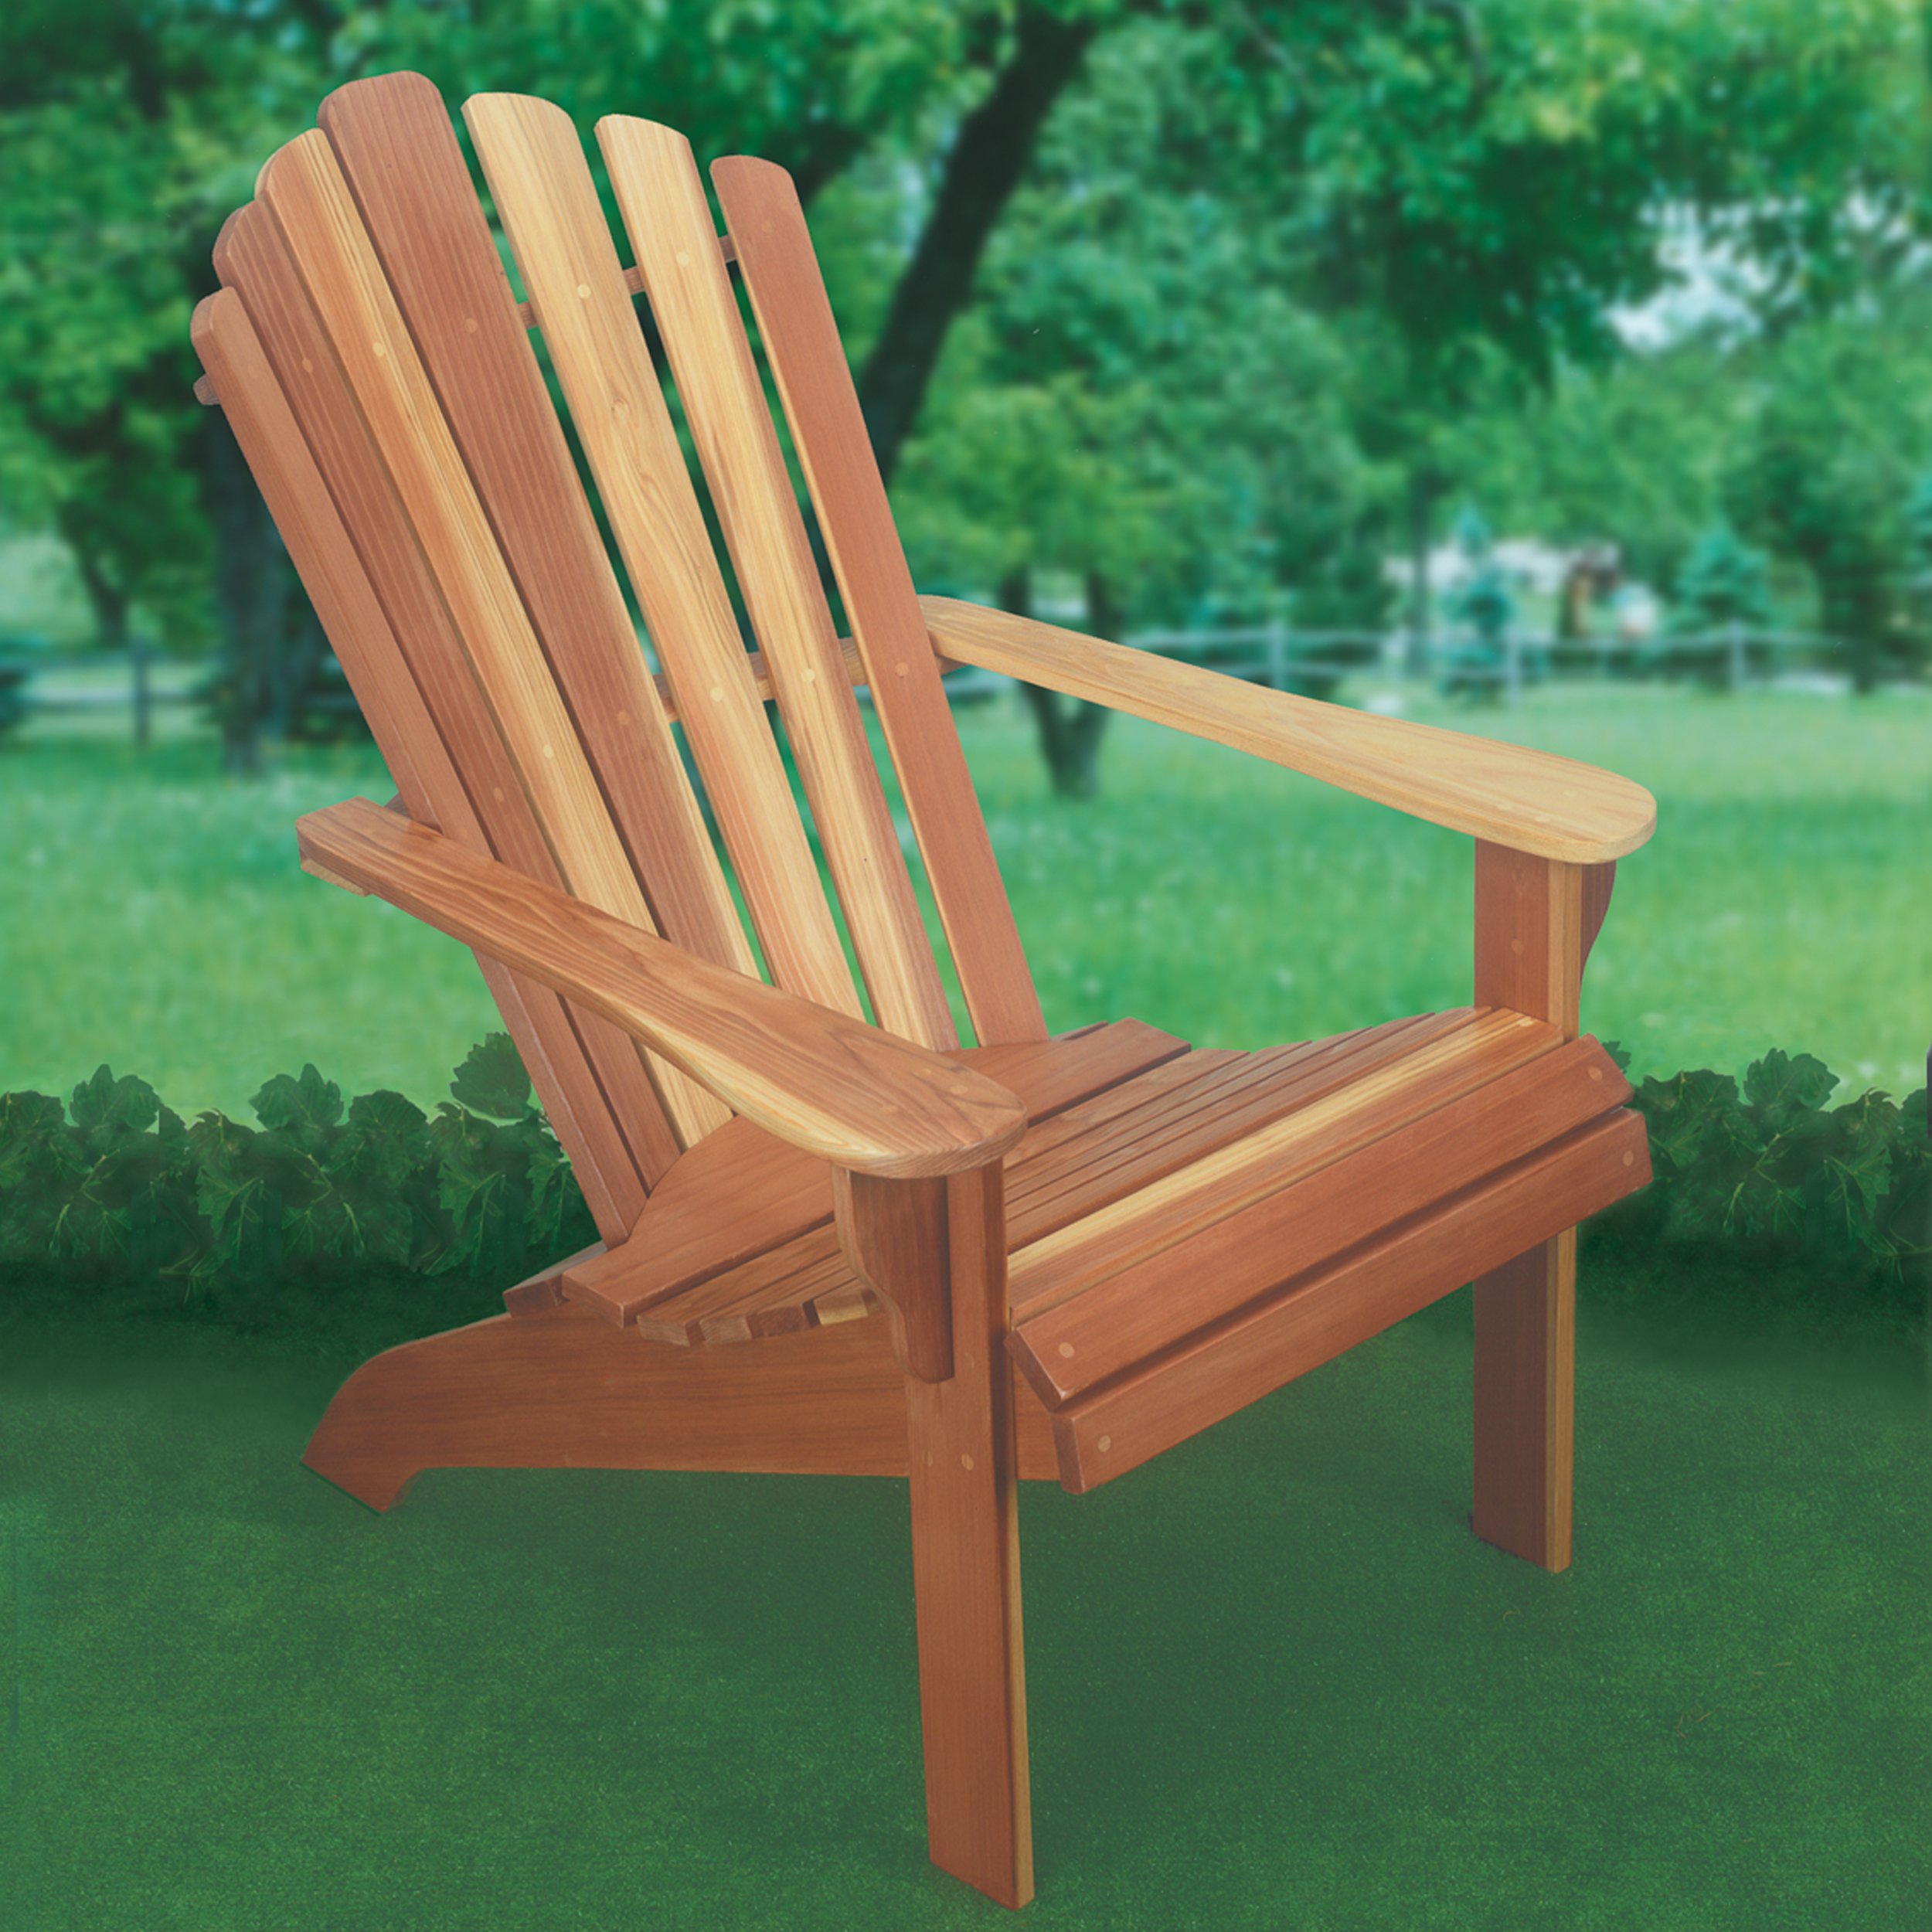 Woodworking Project Paper Plan to Build Adirondack Chair ...